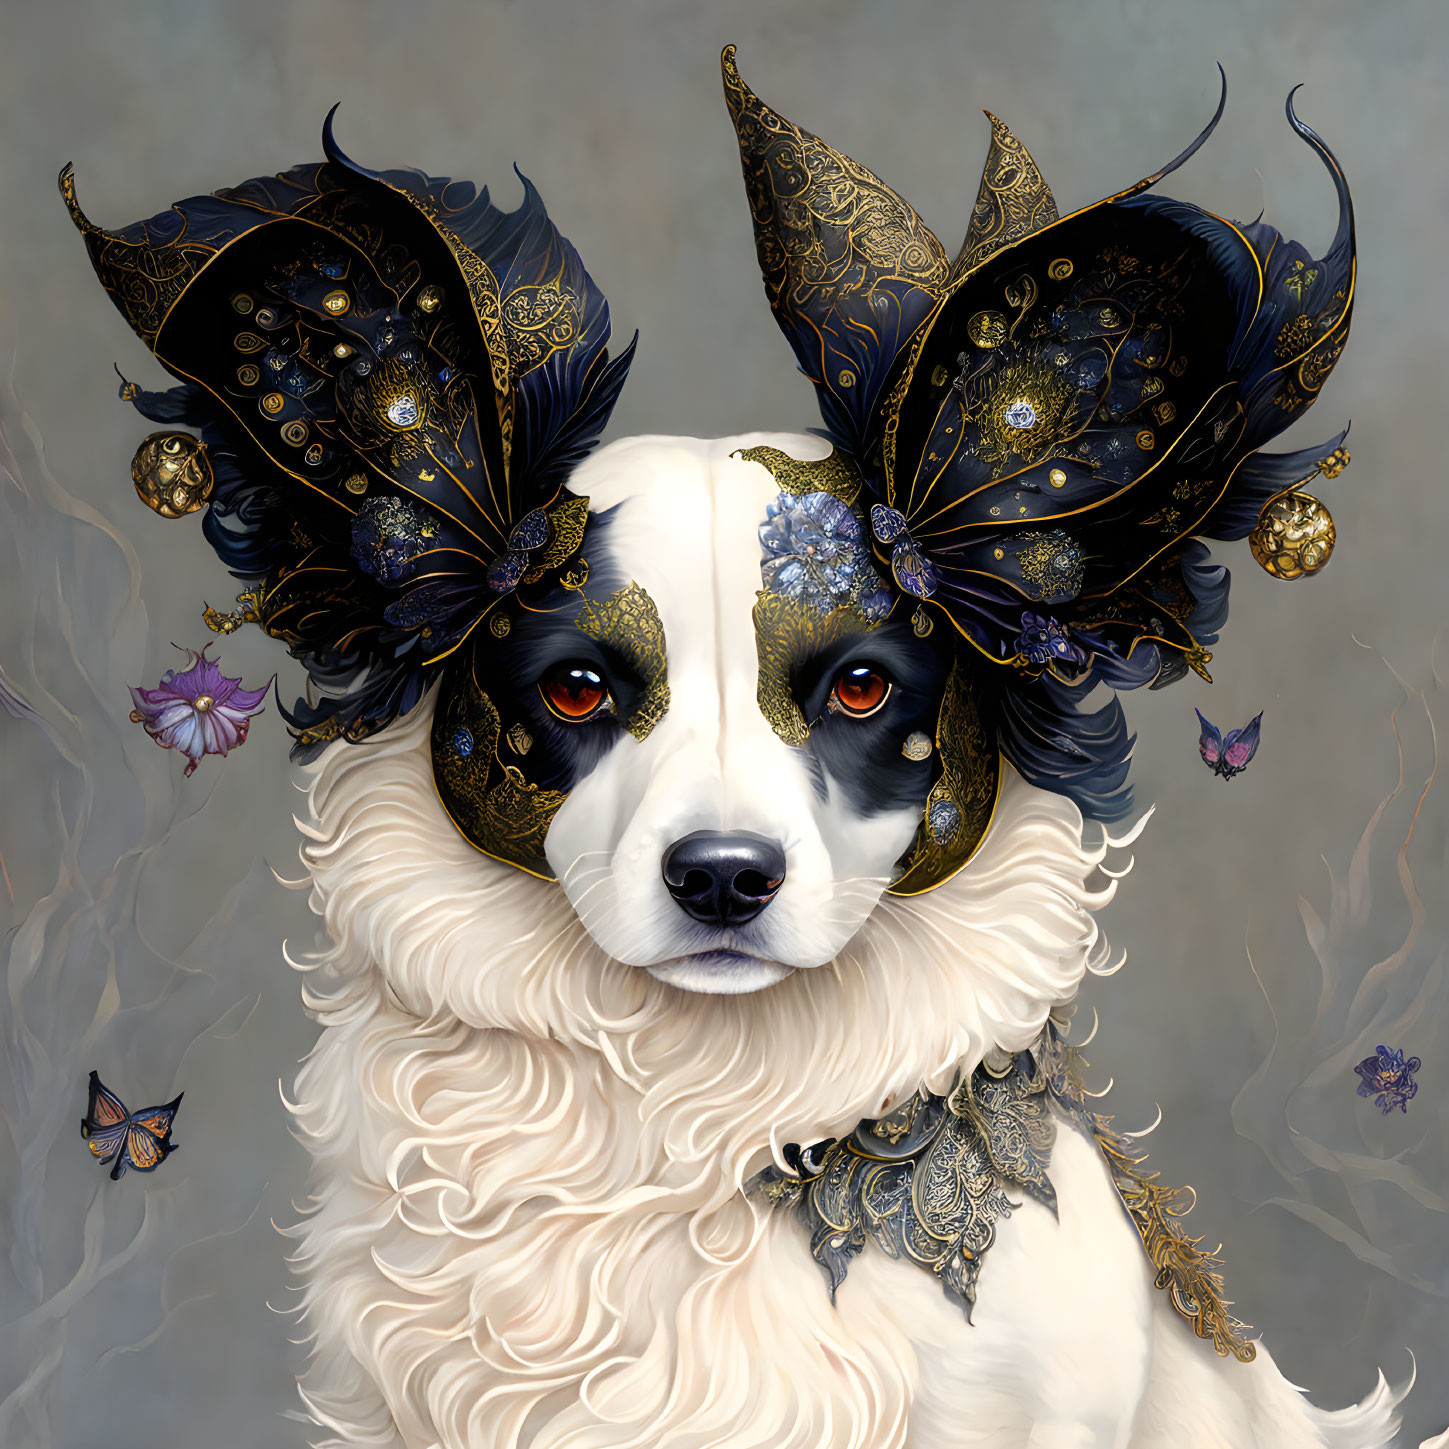 Detailed illustration of a dog in ornate mask with butterflies